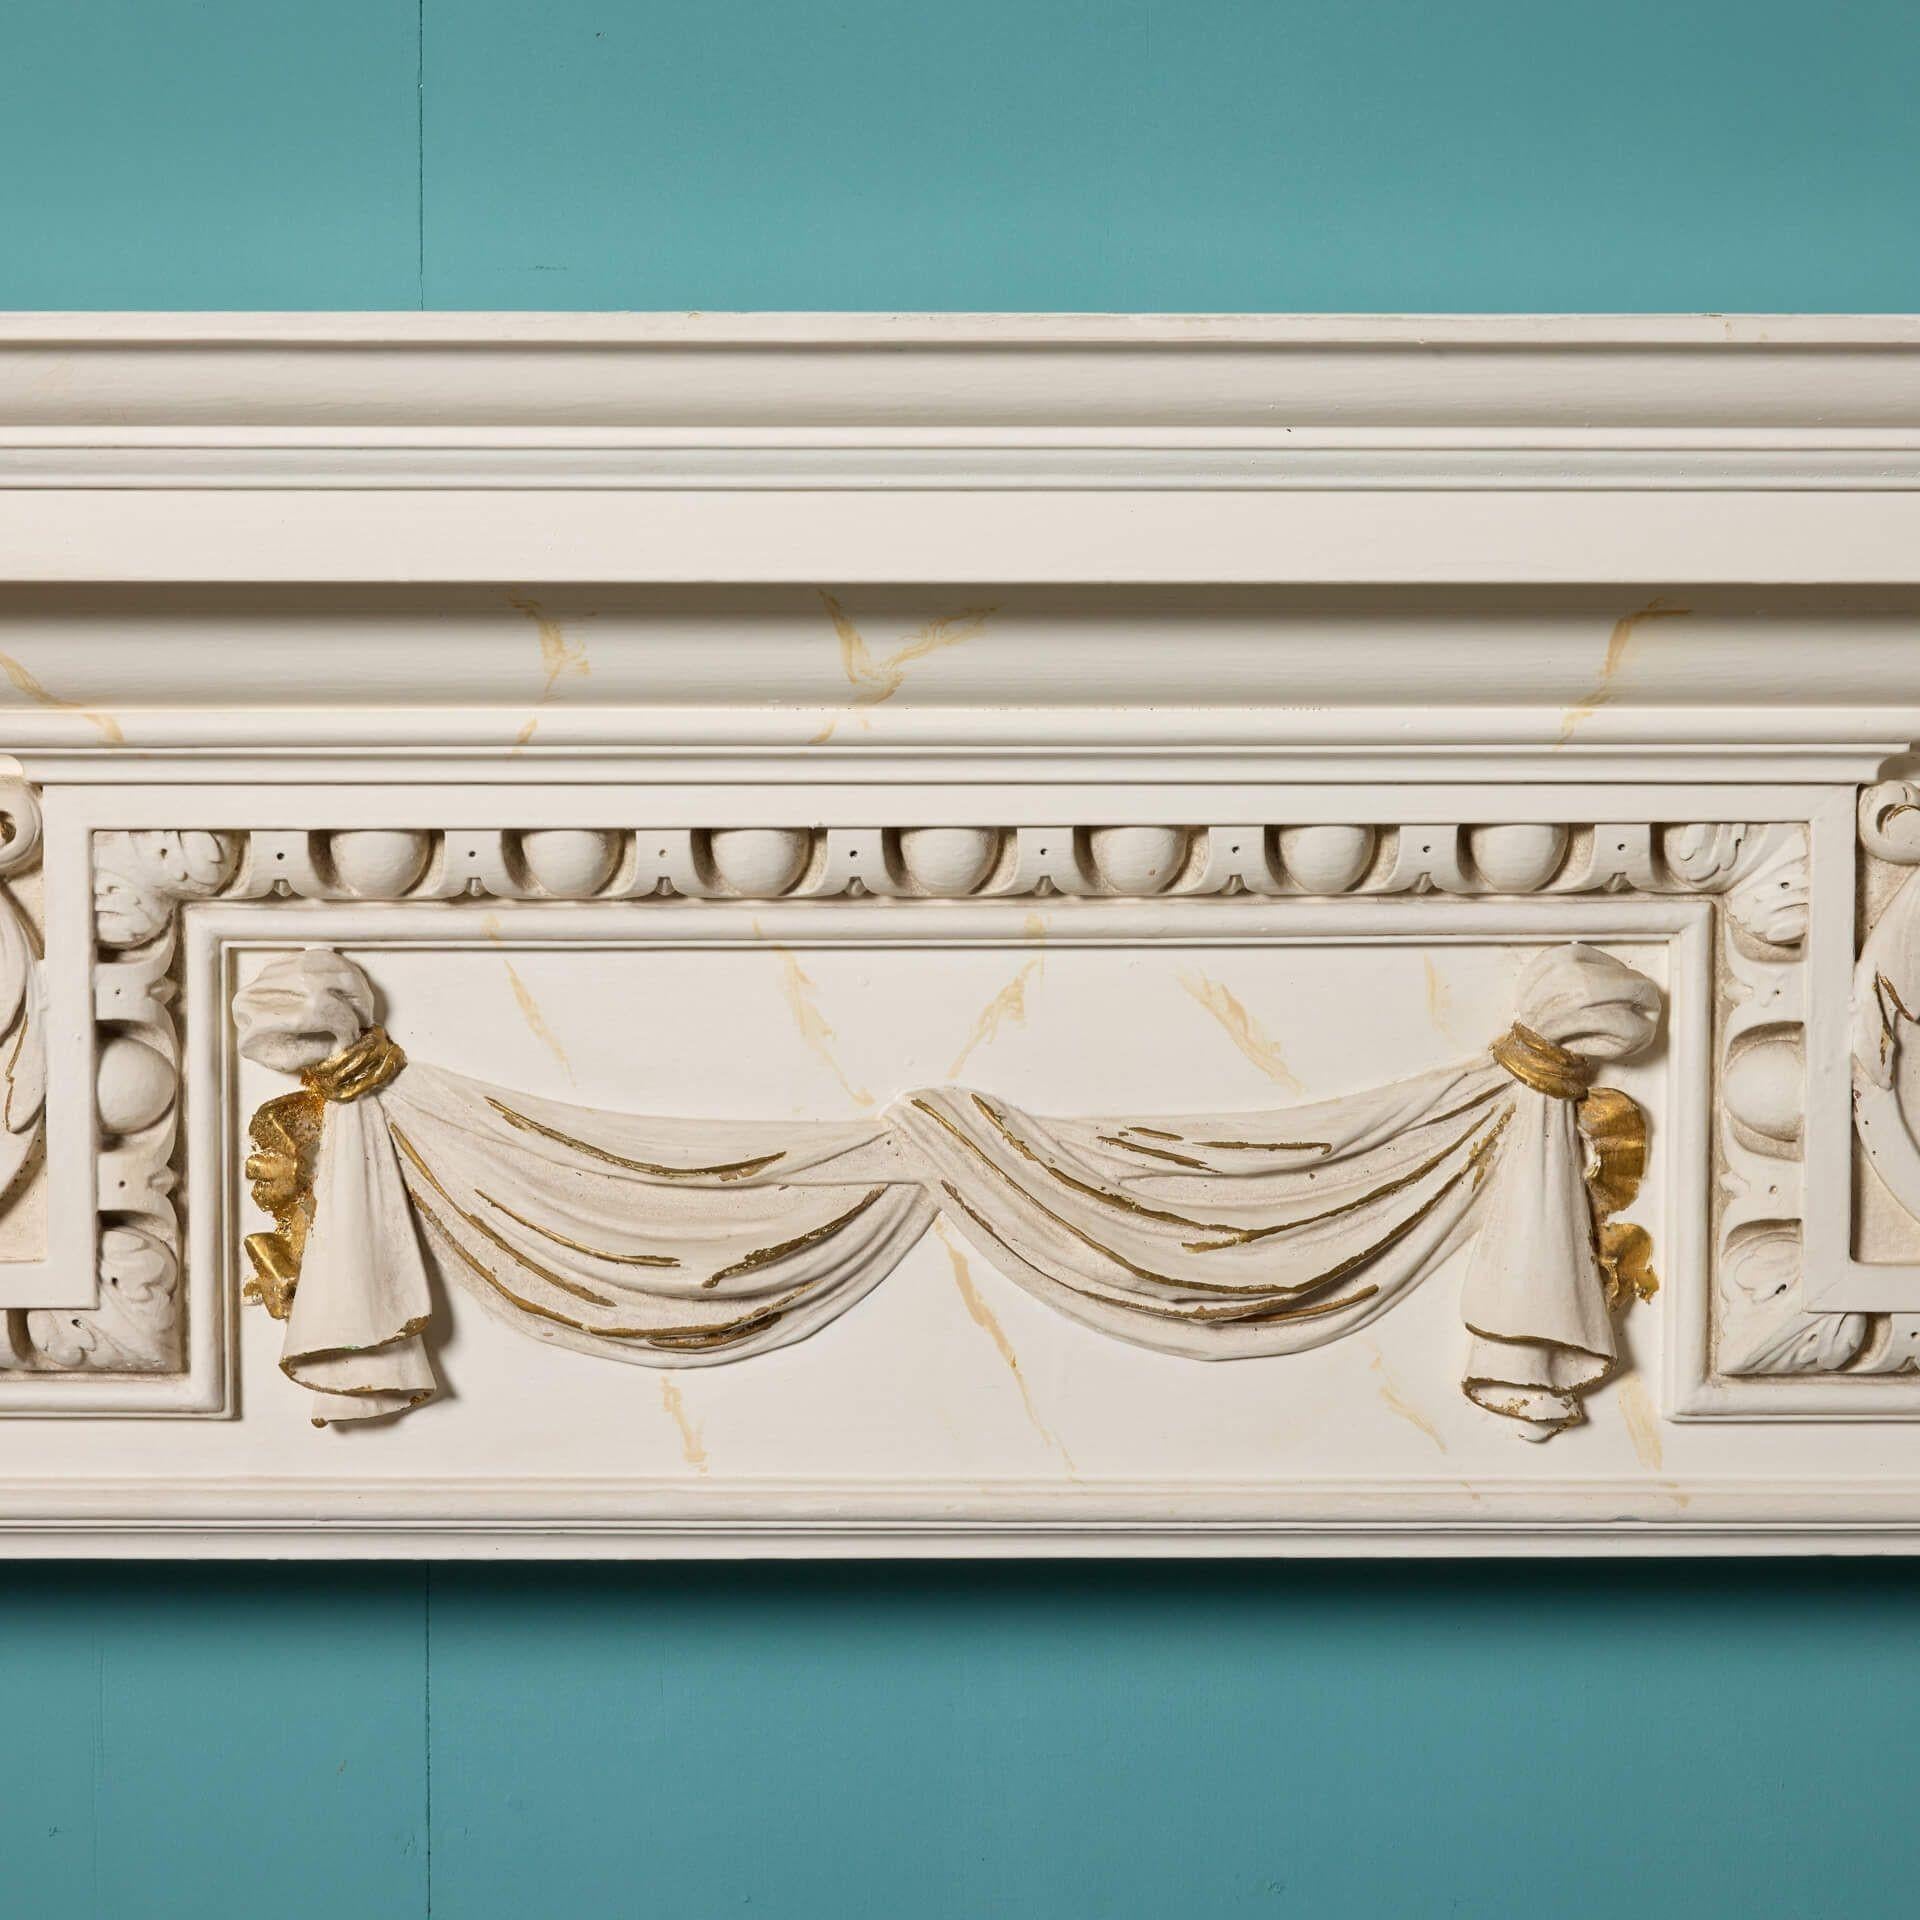 Antique Neoclassical Painted Oak Fire Mantel In Fair Condition For Sale In Wormelow, Herefordshire